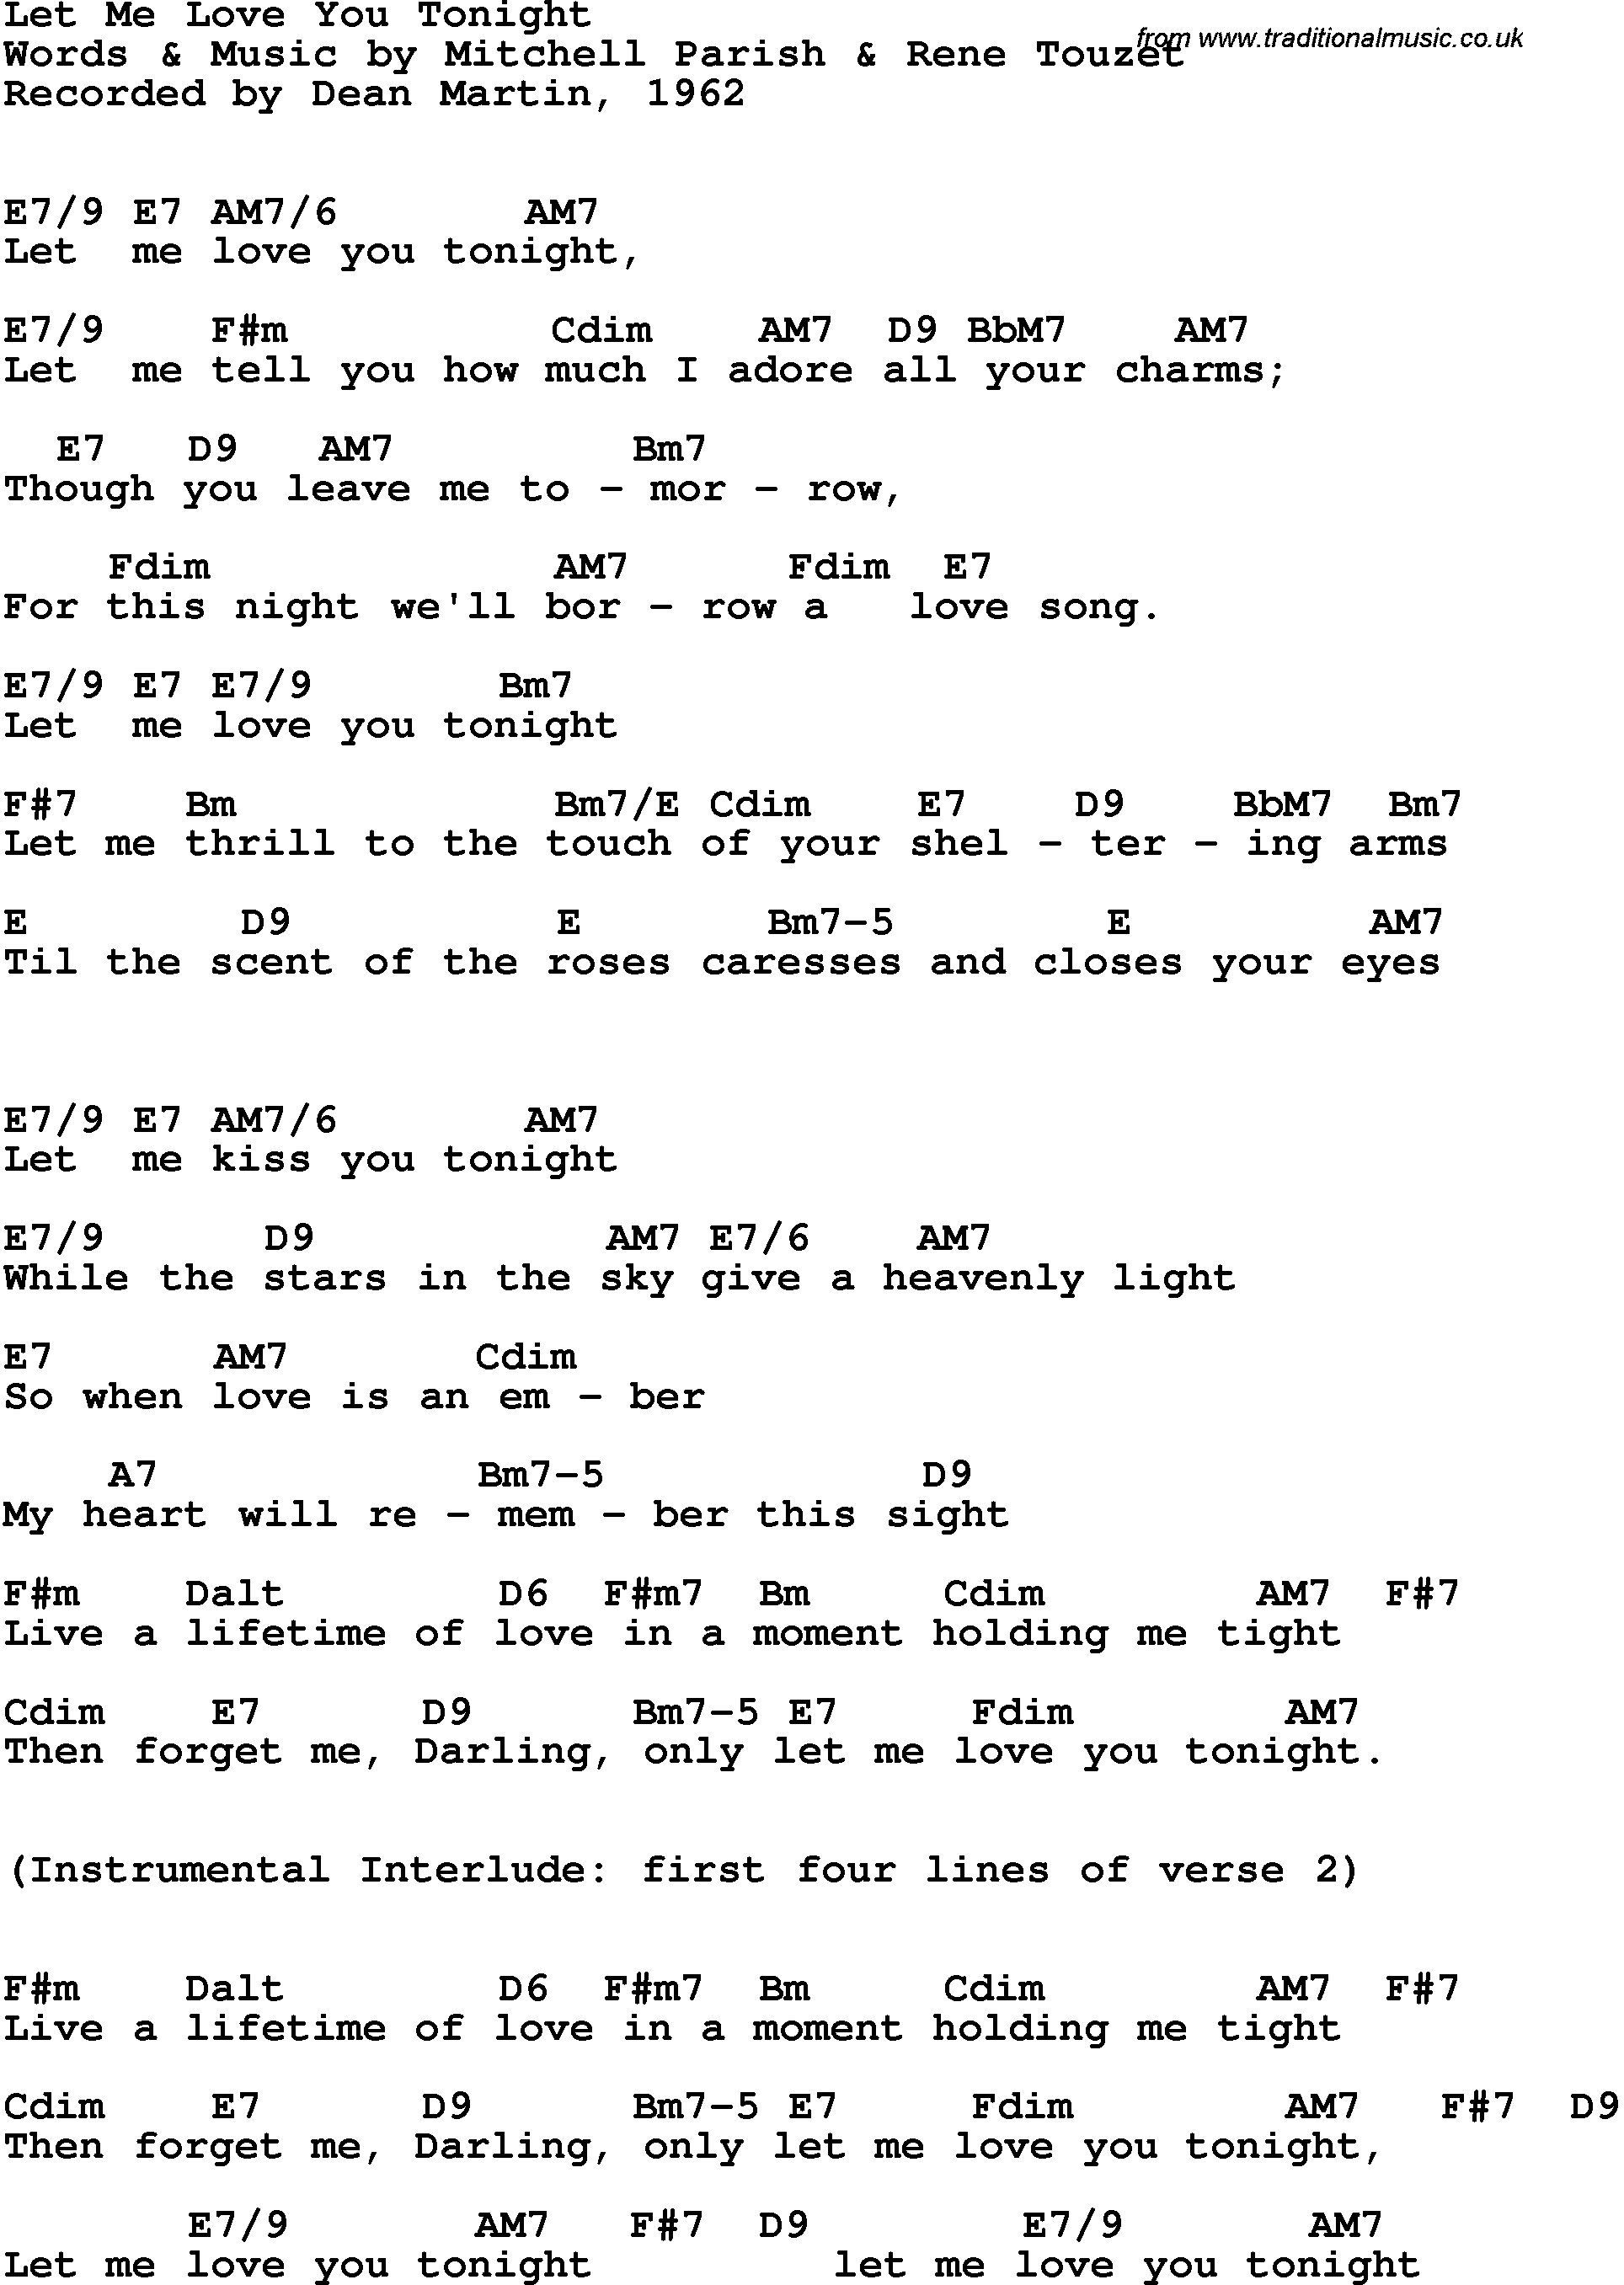 Song Lyrics with guitar chords for Let Me Love You Tonight - Dean Martin, 1962